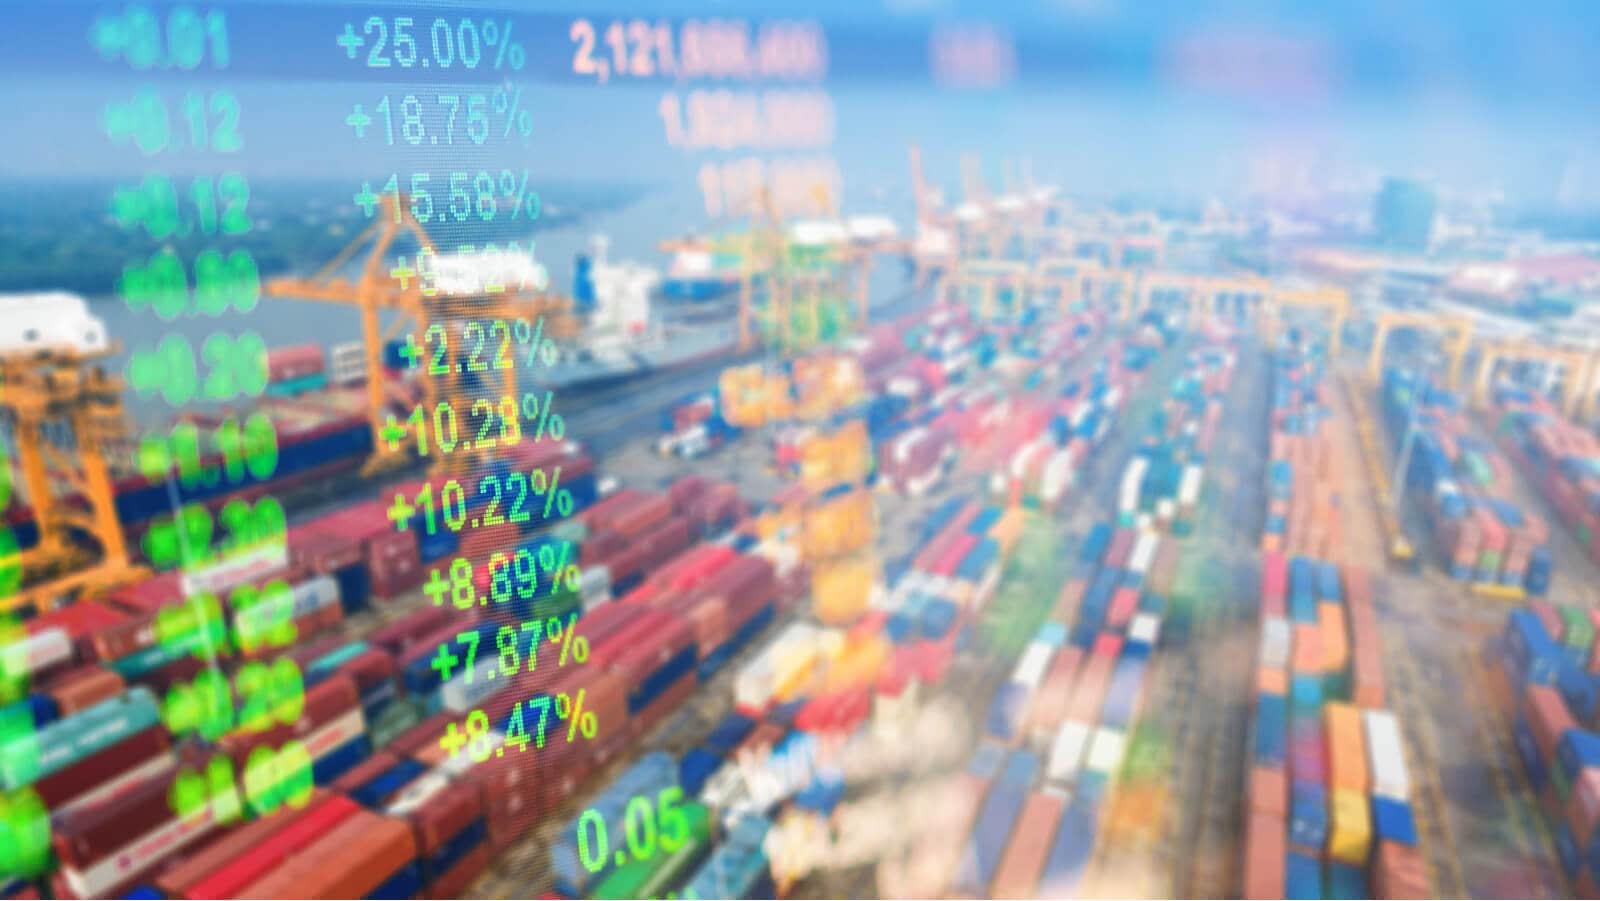 Digital data numbers overlaying a supply chain shipping container yard